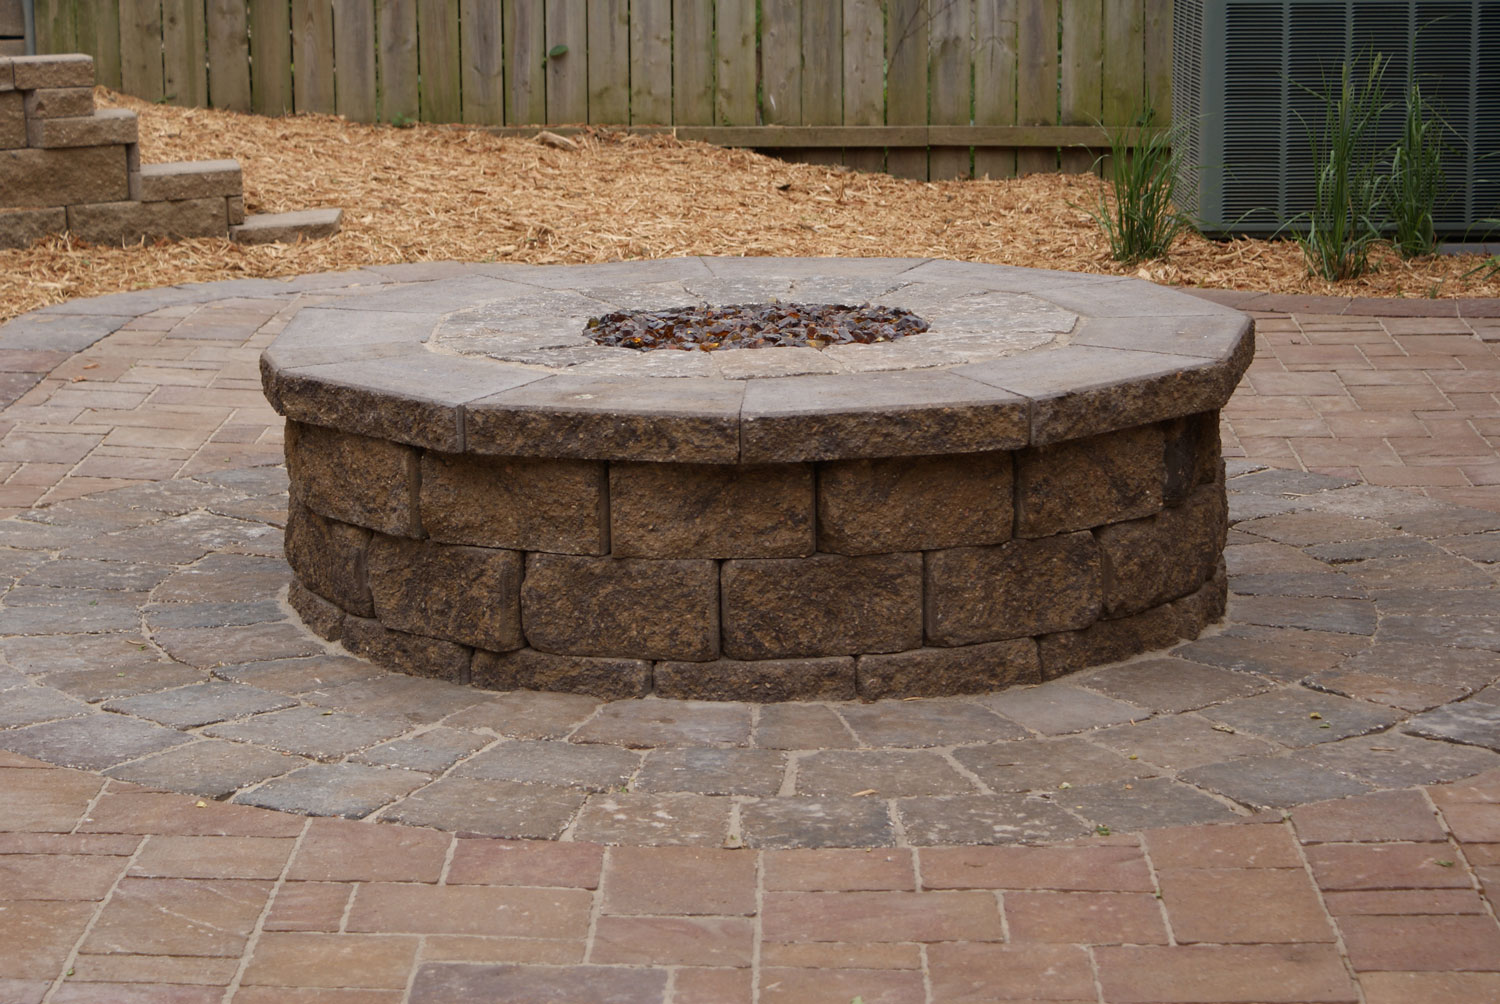 Indoor Fire Pit Pictures Design And Ideas, Menards Fire Pit Kit